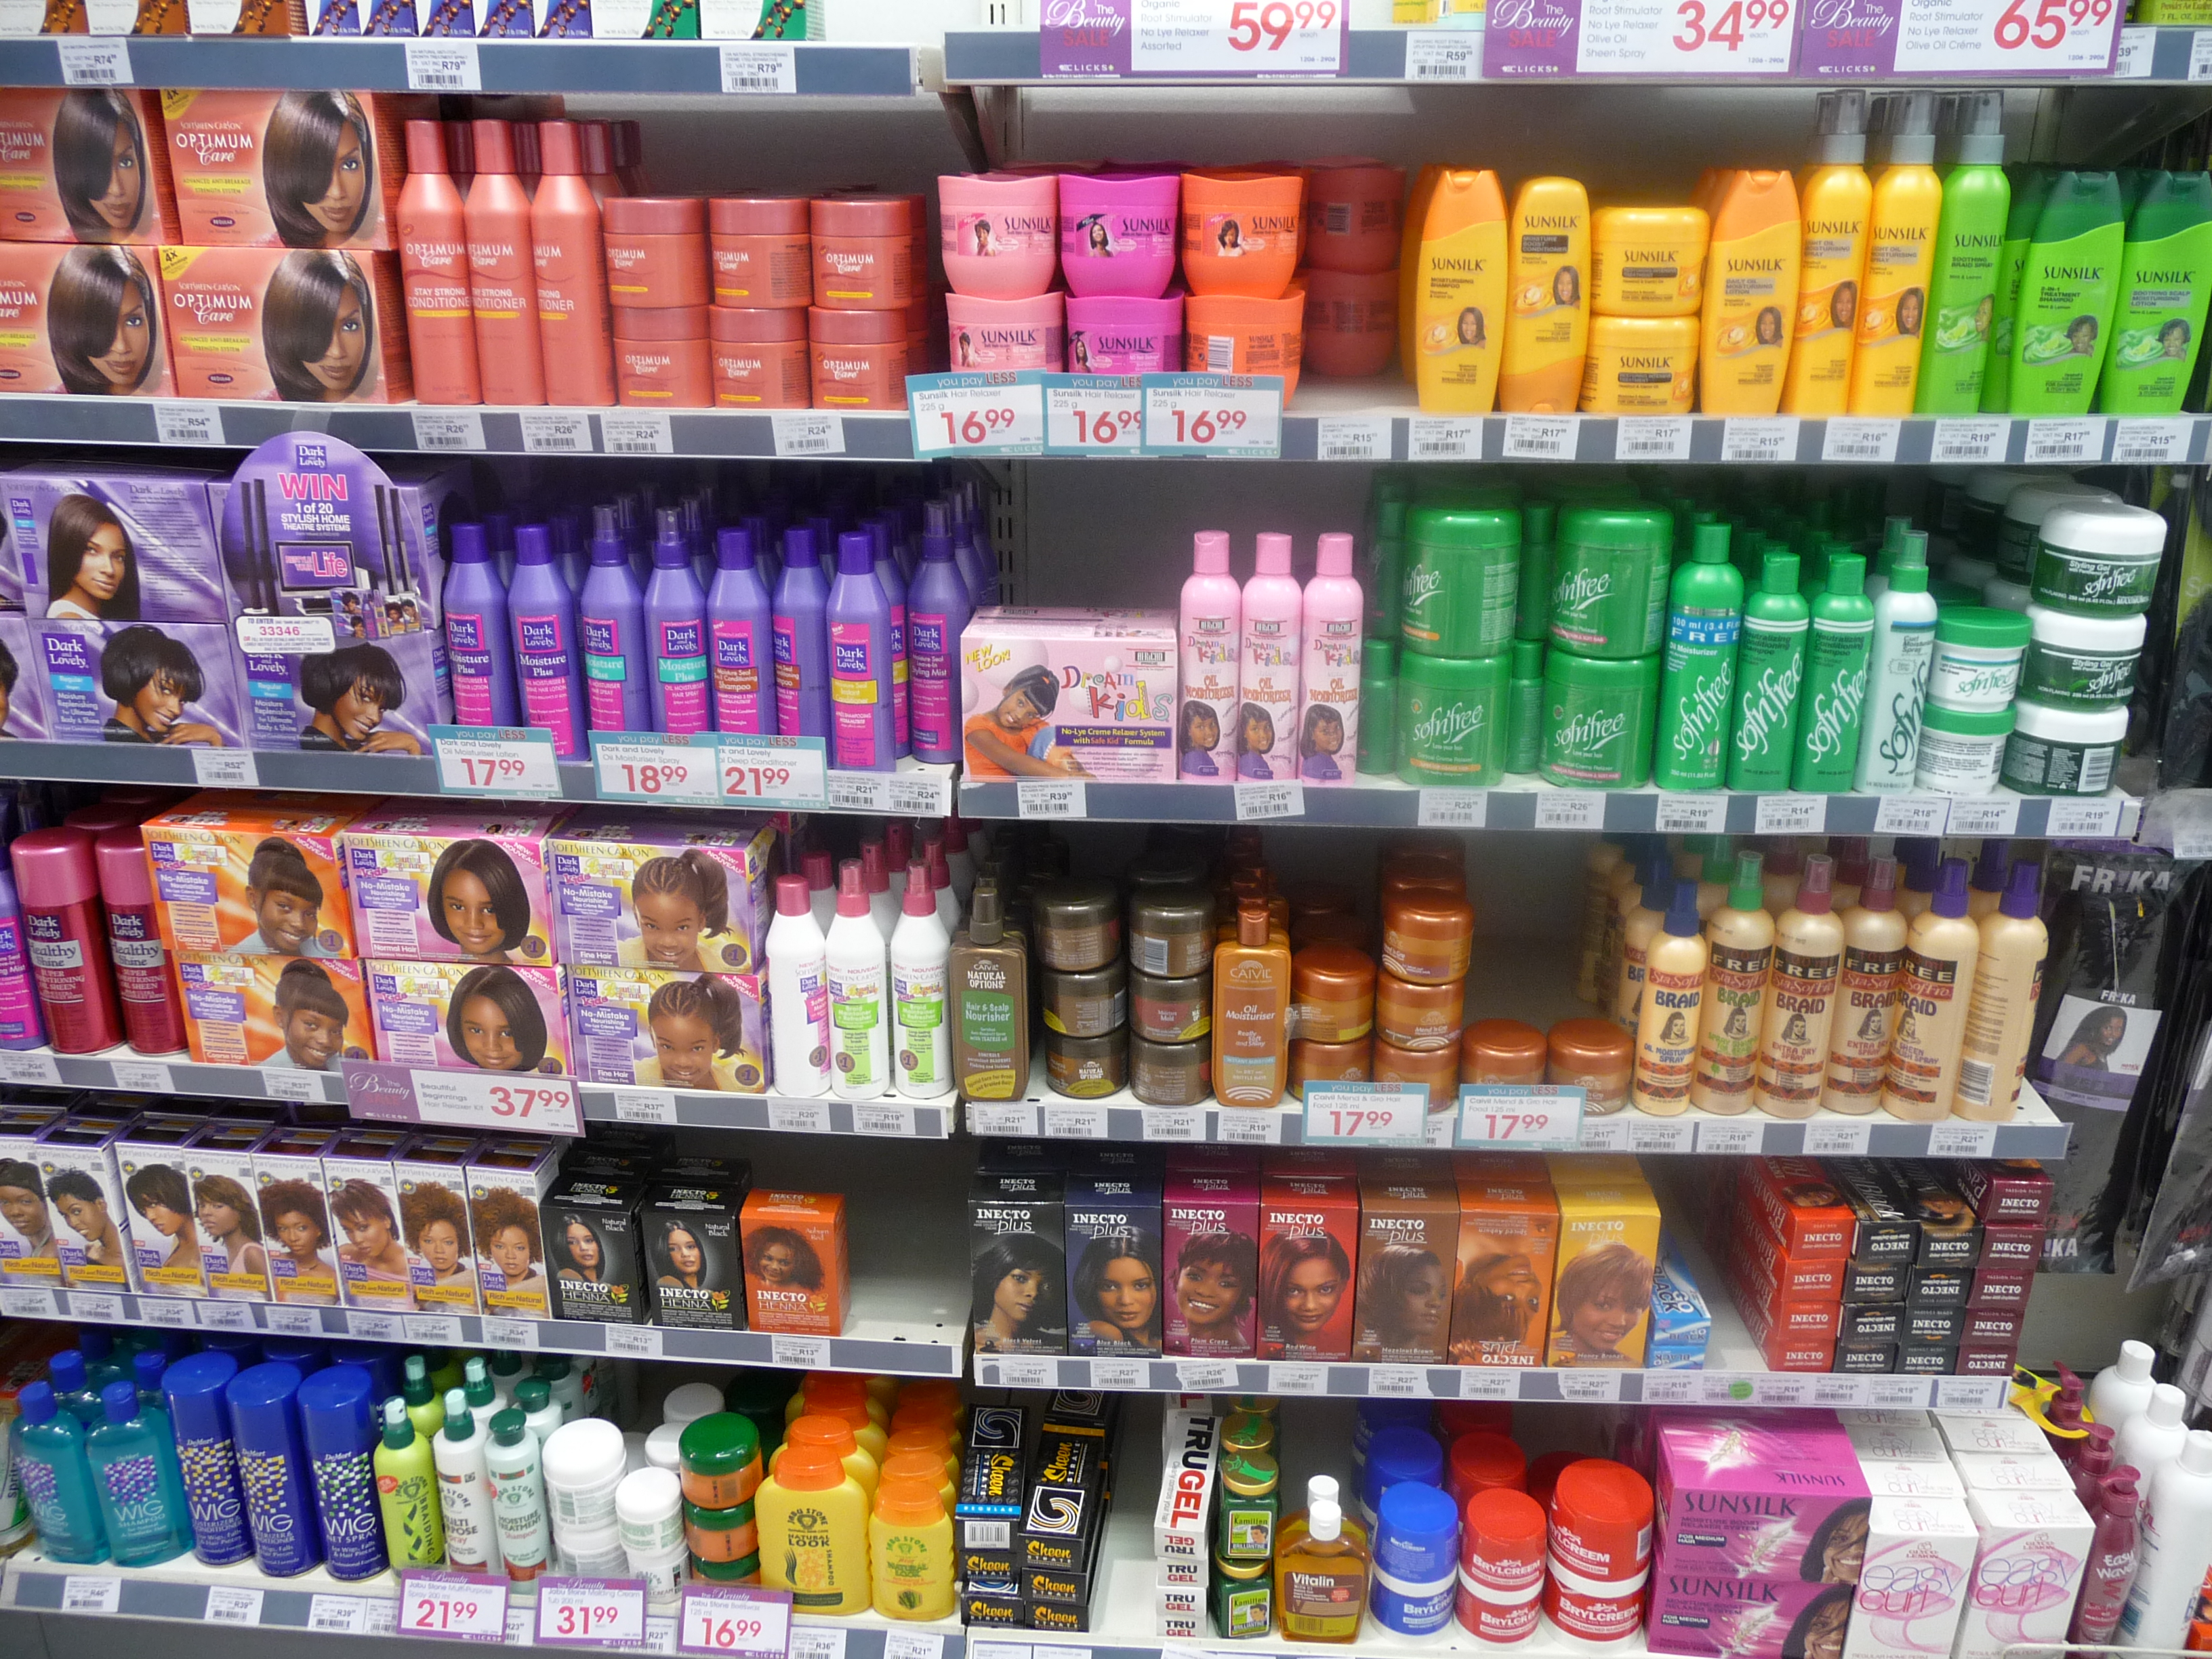 African American Hair Products